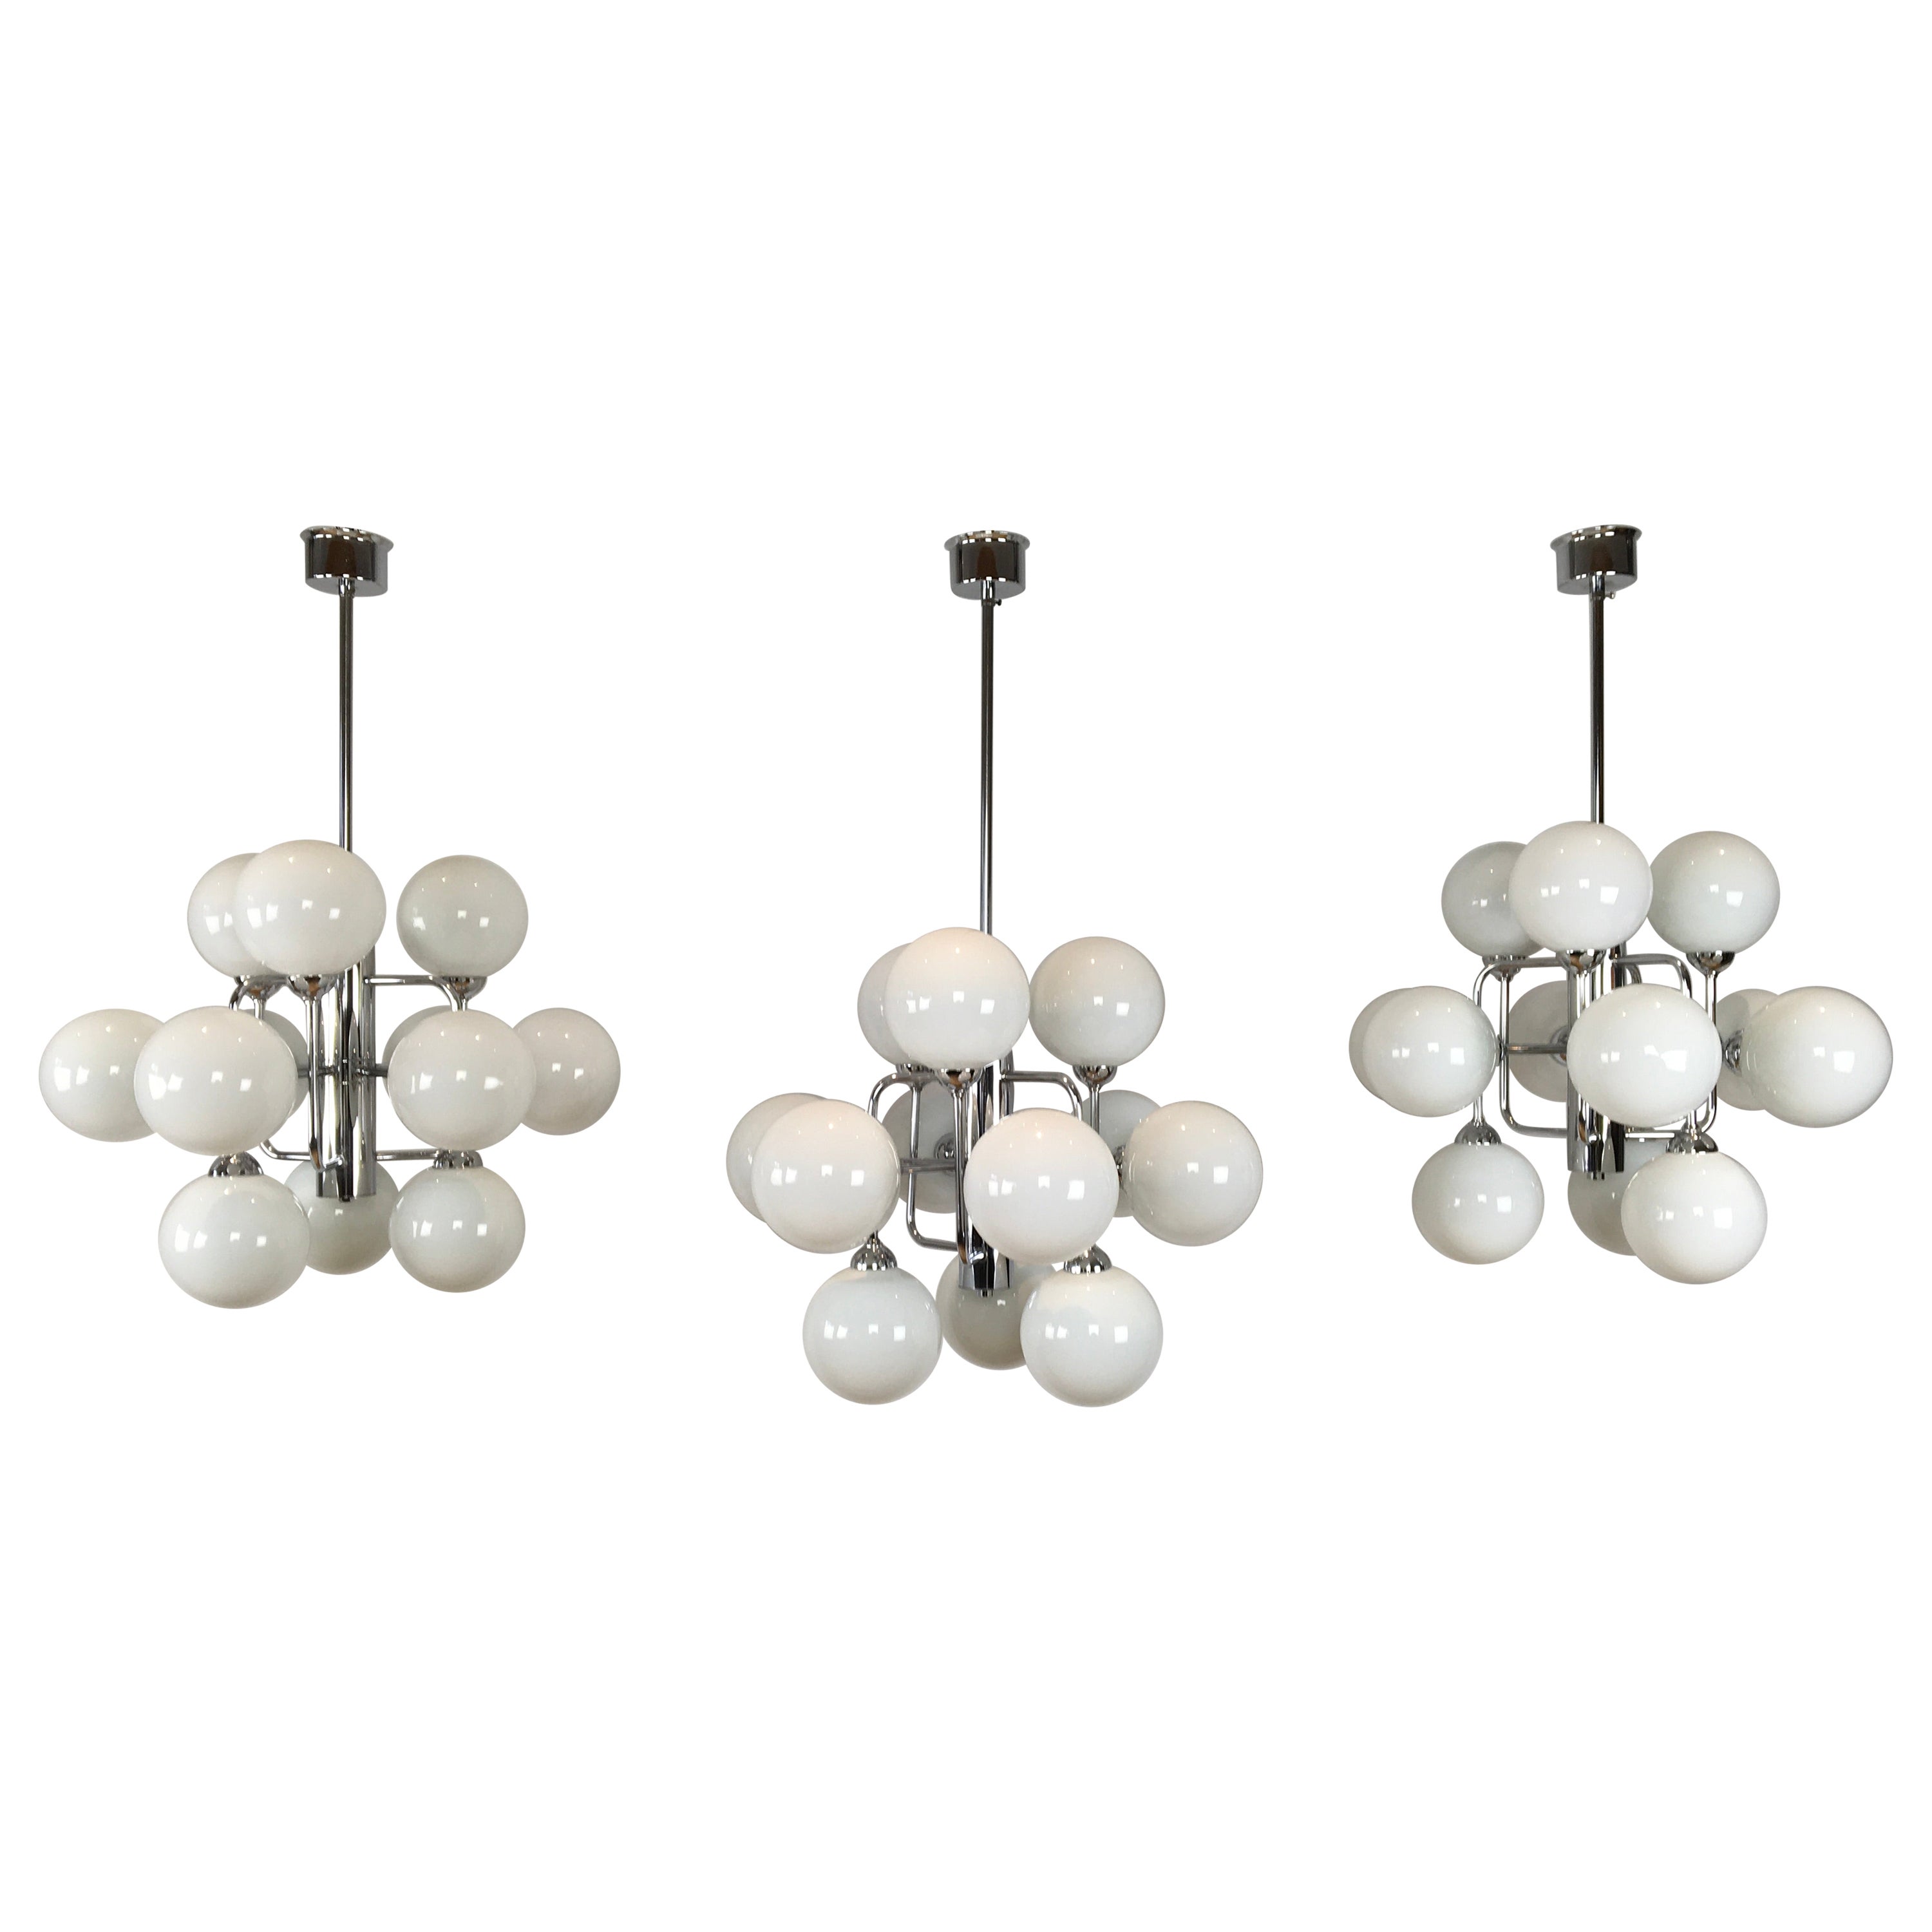 Mid-Century Atomic Chandeliers with 12 Lights, 3 Pieces Available For Sale